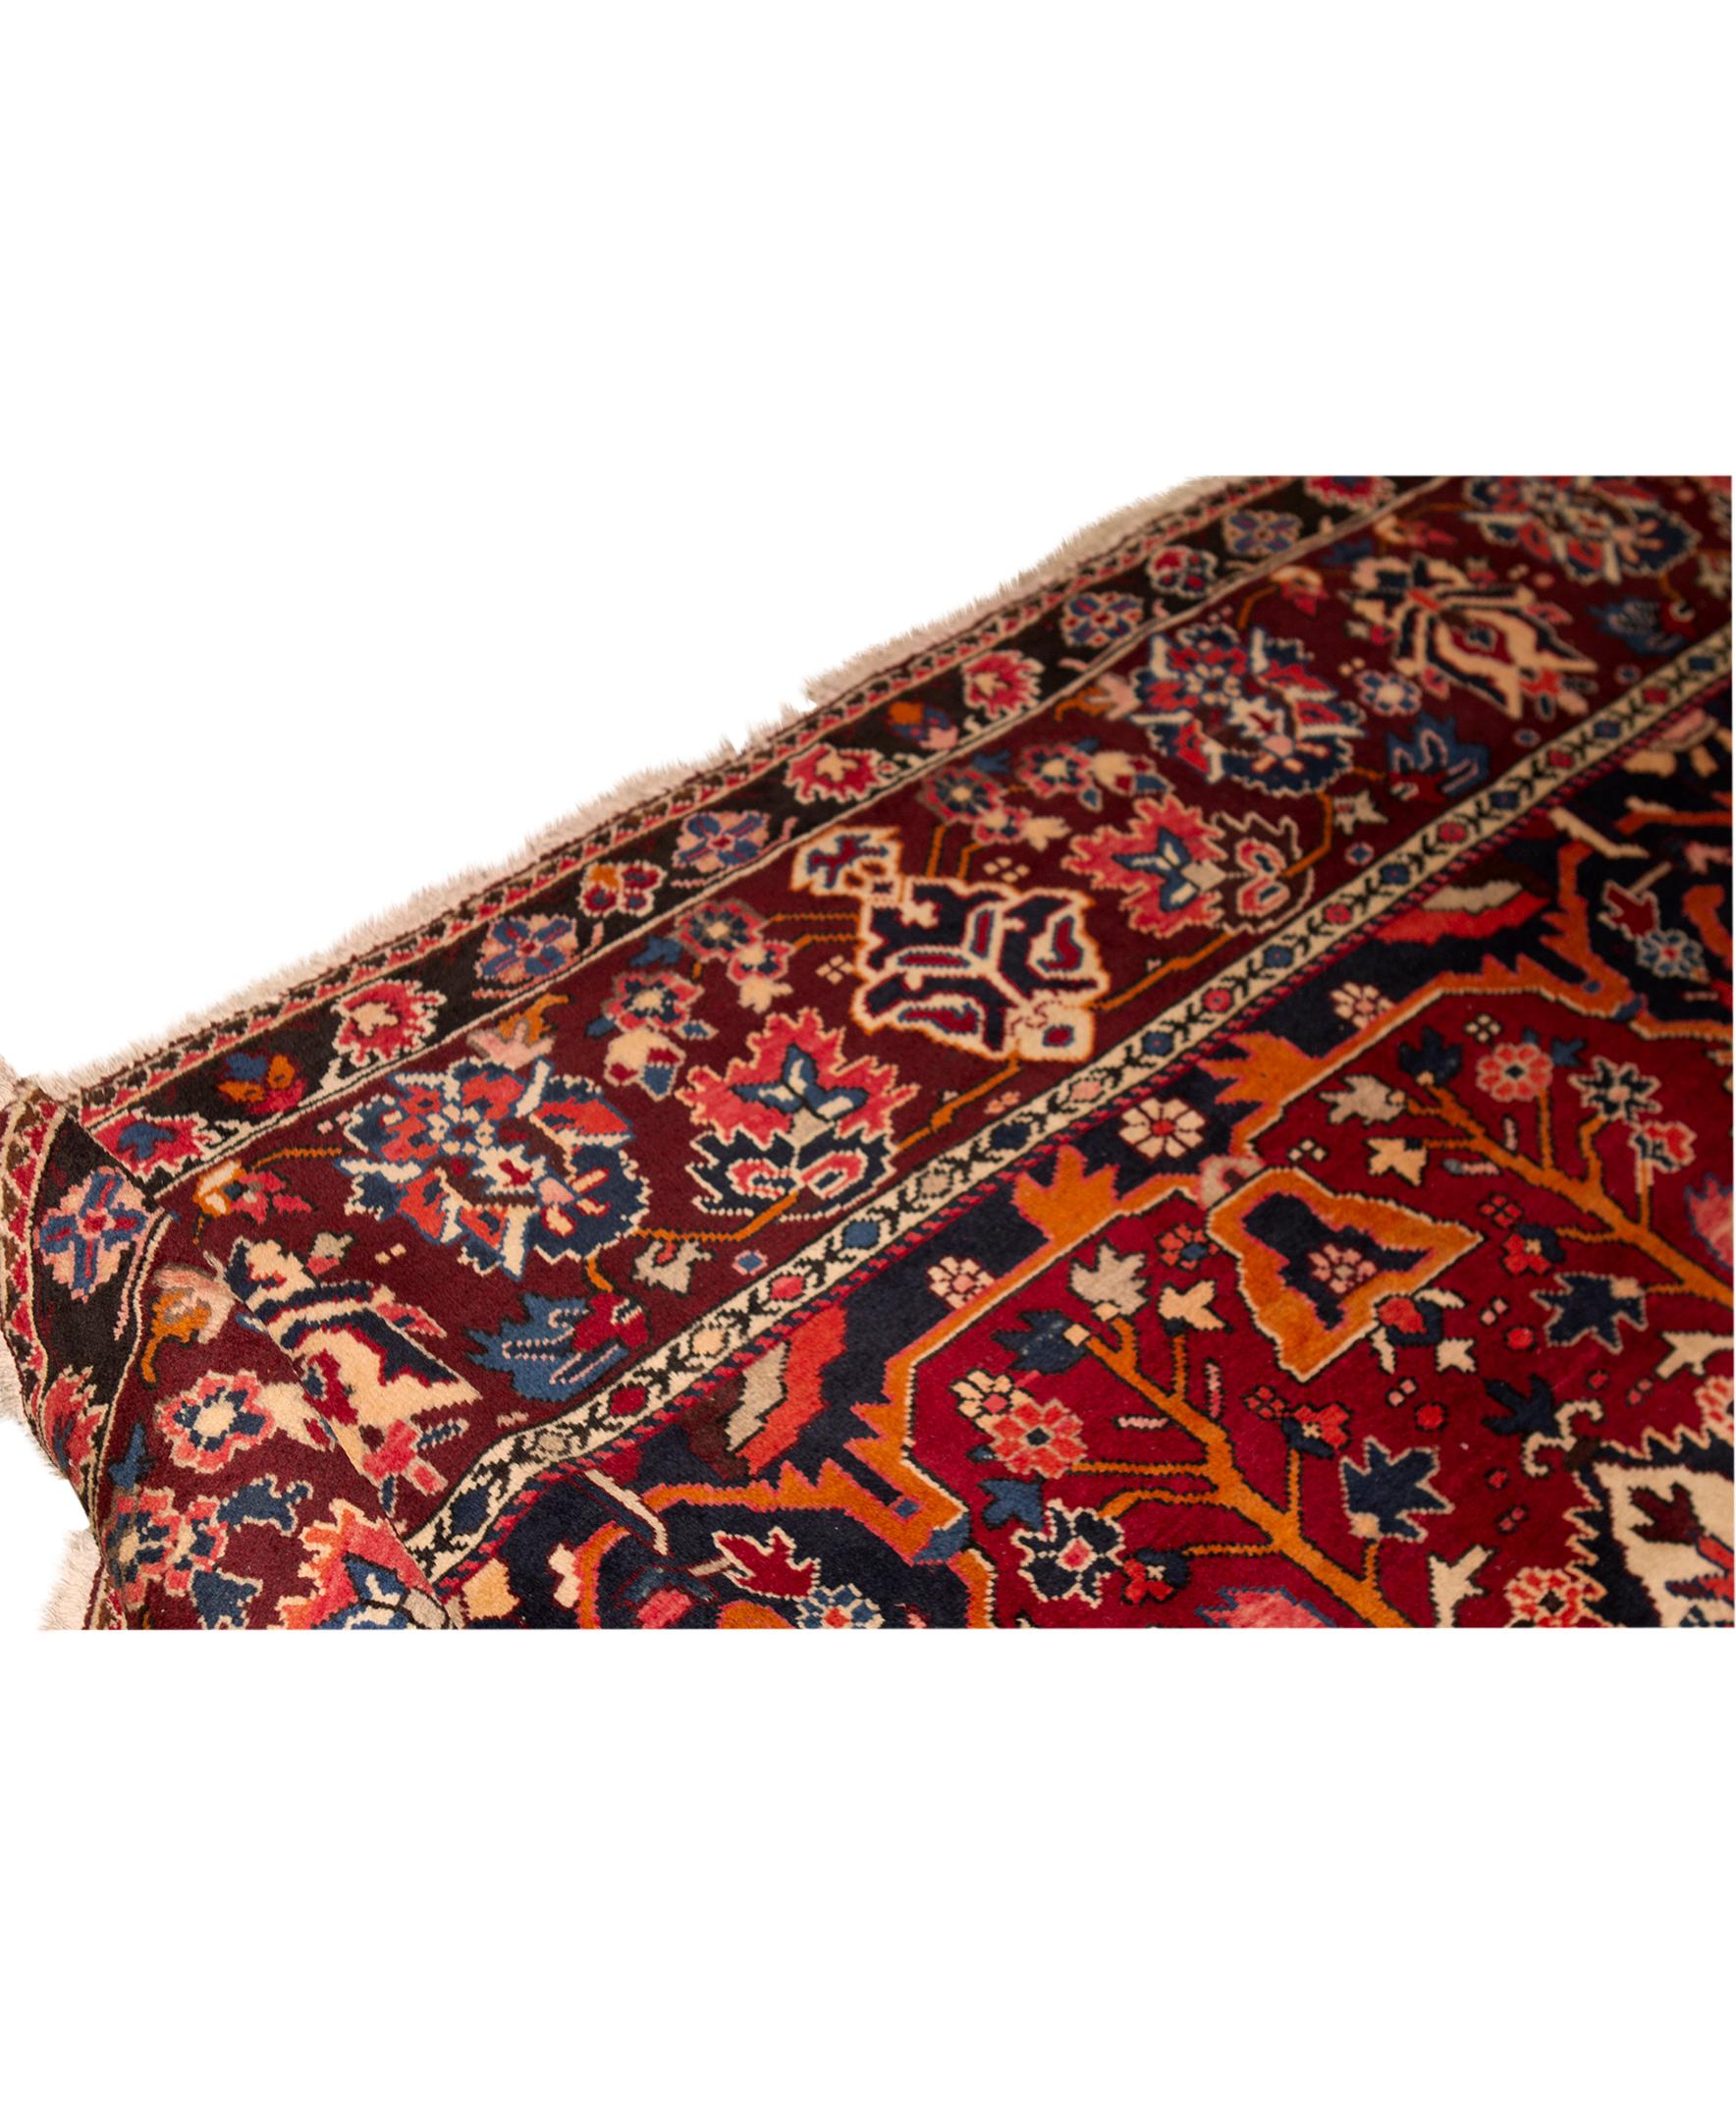 Hand-Woven   Antique Persian Fine Traditional Handwoven Luxury Wool Red Rug For Sale